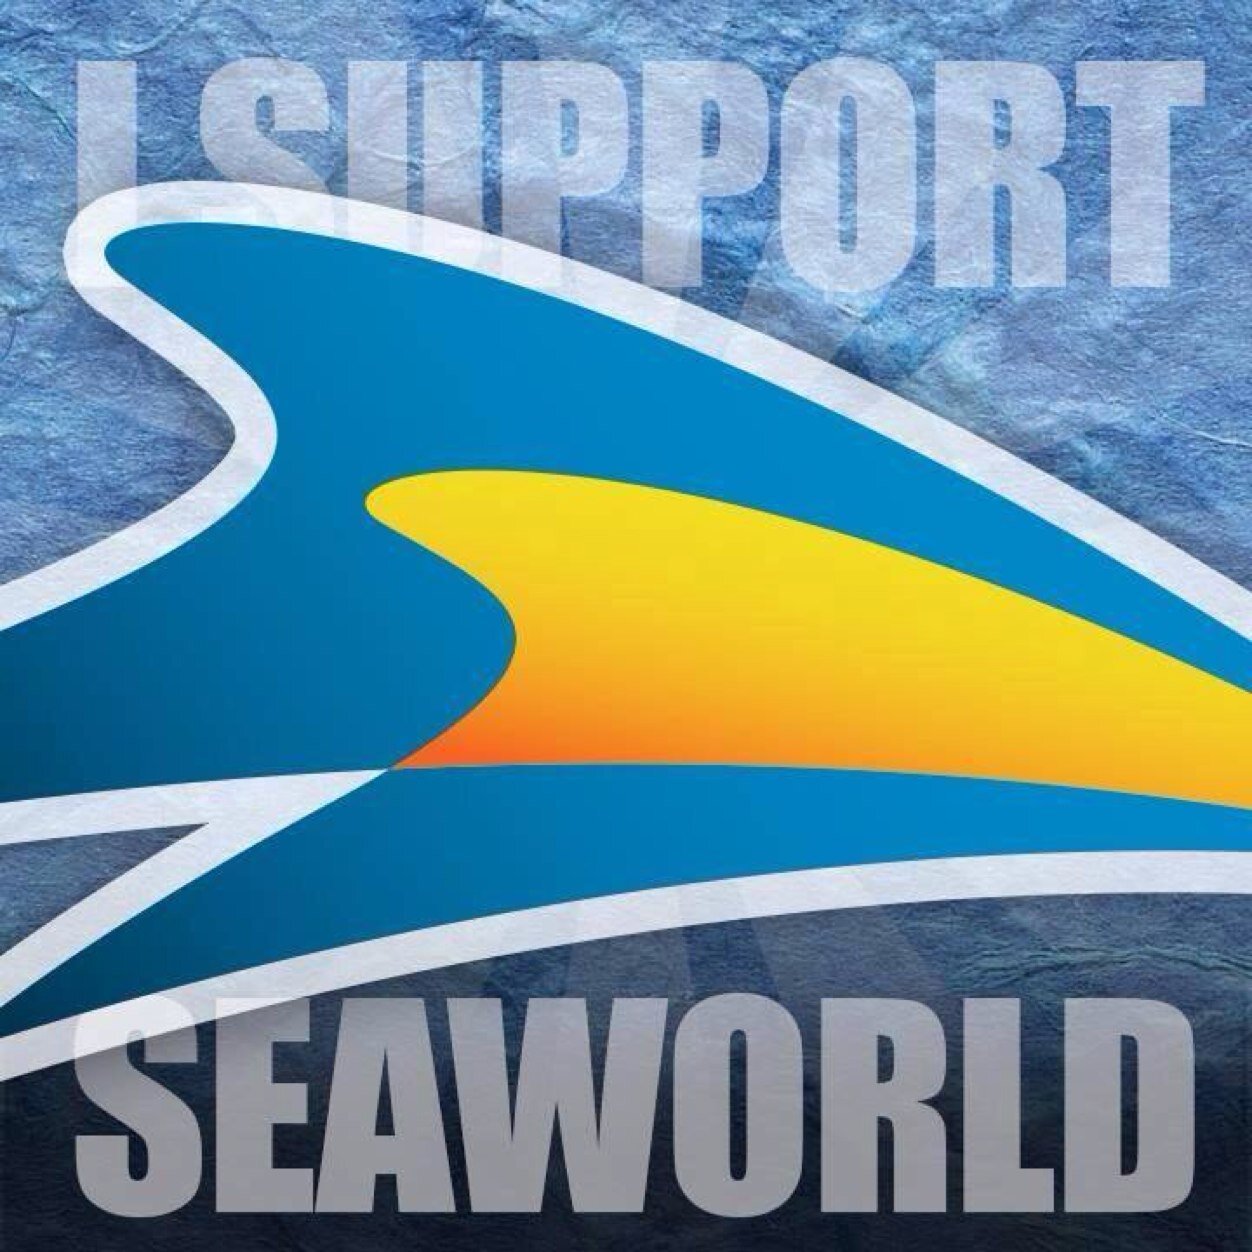 This is a community of SeaWorld supporters and fans. We have no affiliation with SeaWorld Parks & Entertainment.